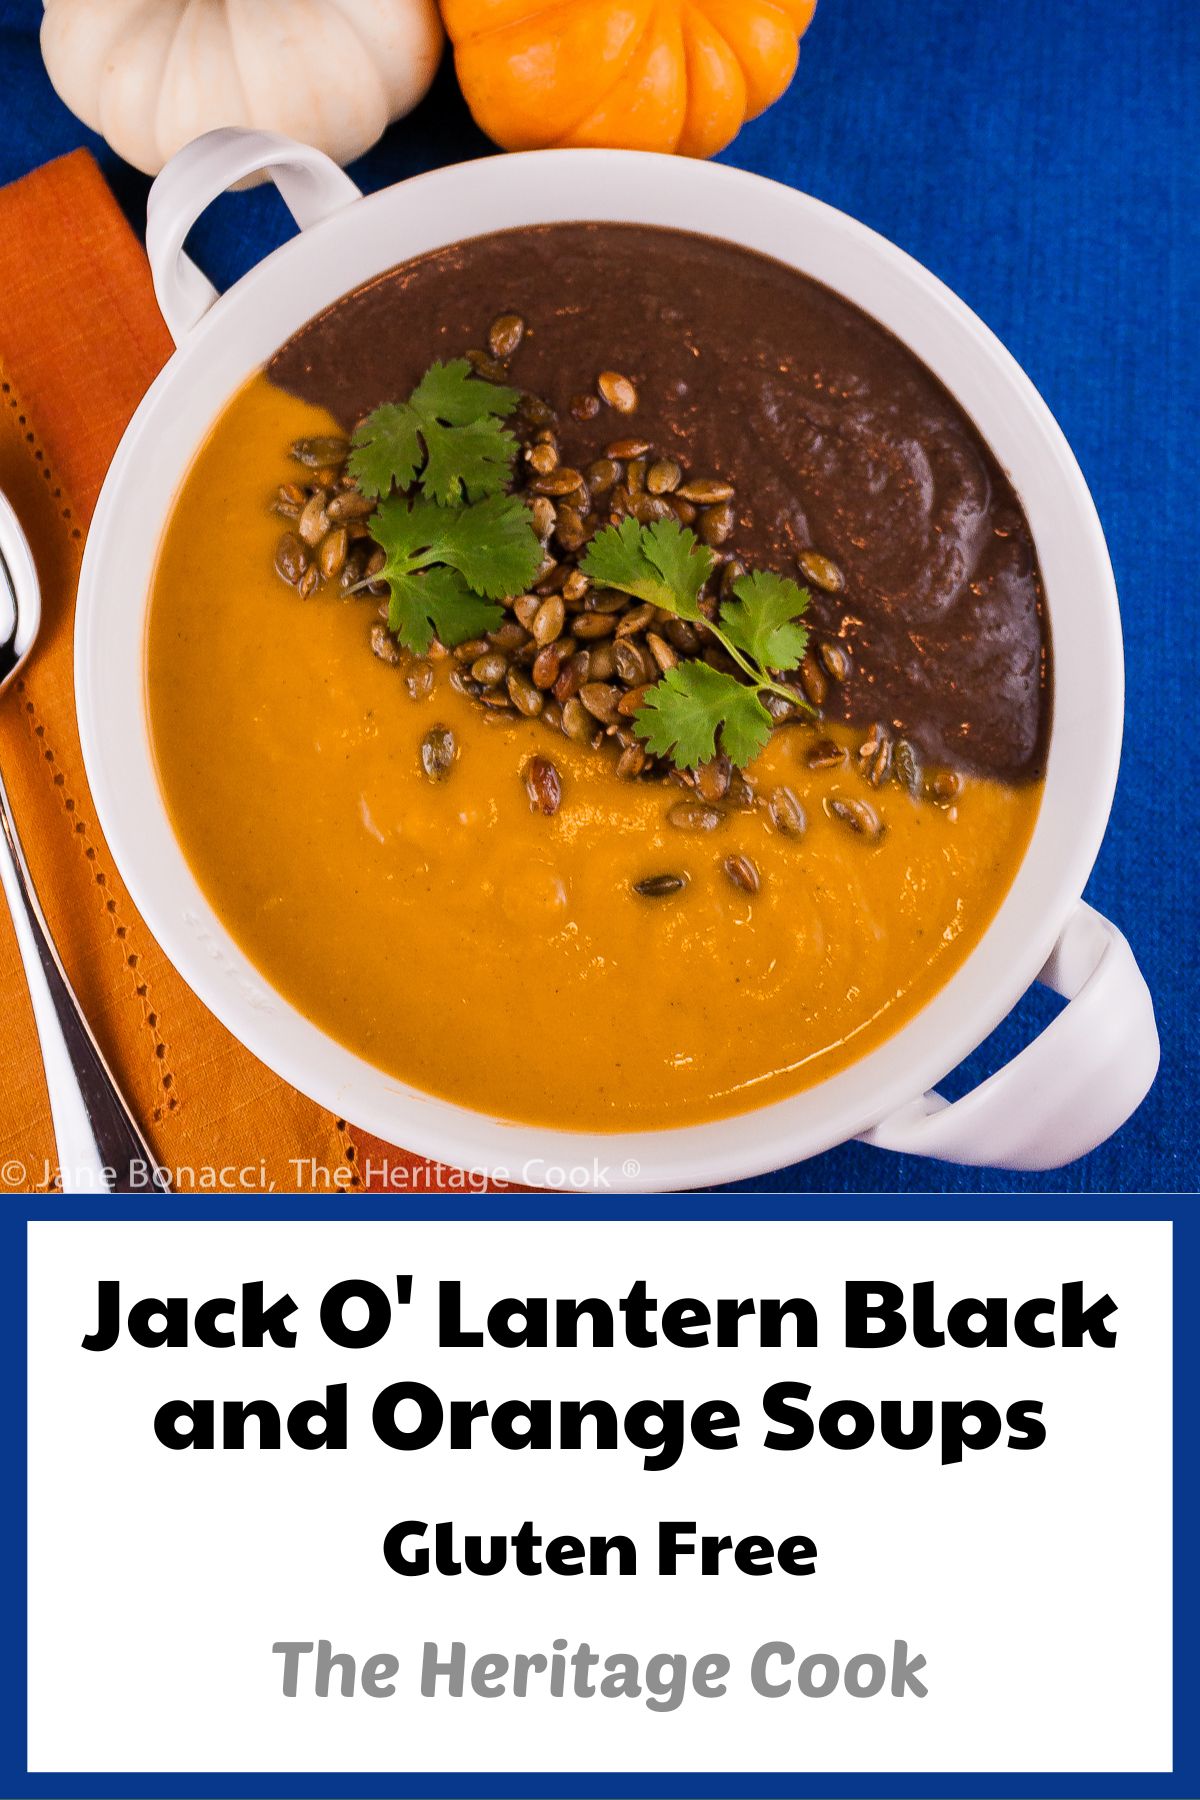 A bowl with two soups side by side, one orange, and the other black; Jack O’ Lantern Soup; Butternut Squash-Carrot Soup & Spicy Black Bean Soup © 2022 Jane Bonacci, The Heritage Cook.